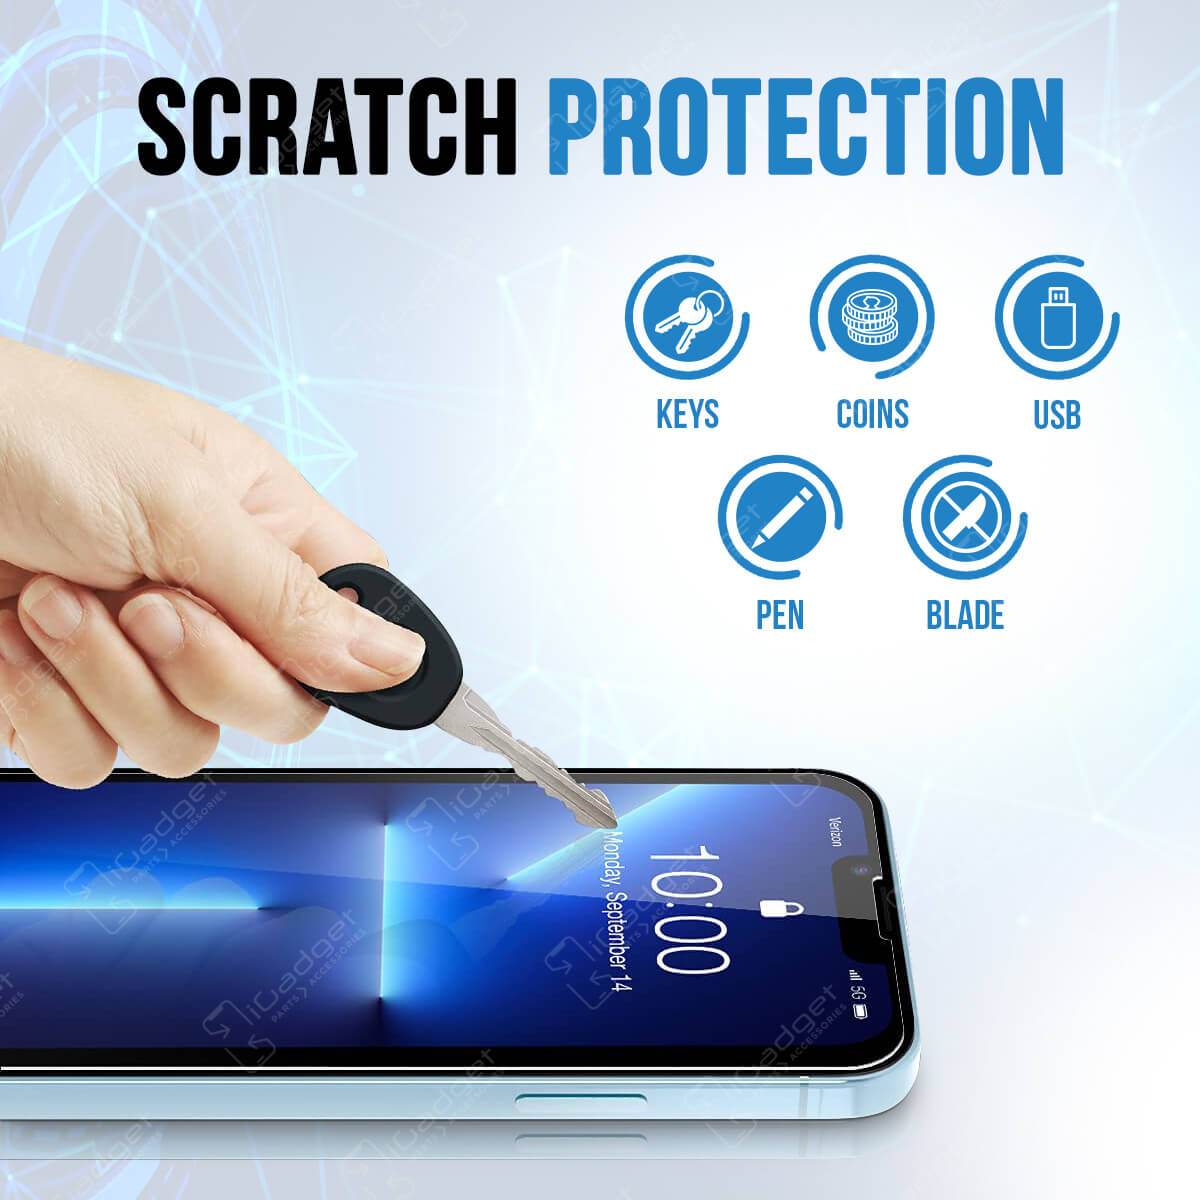 iGadget_iPhone_13_screen_protector_scratch_protection_SO0QDRXEH6WZ.jpg